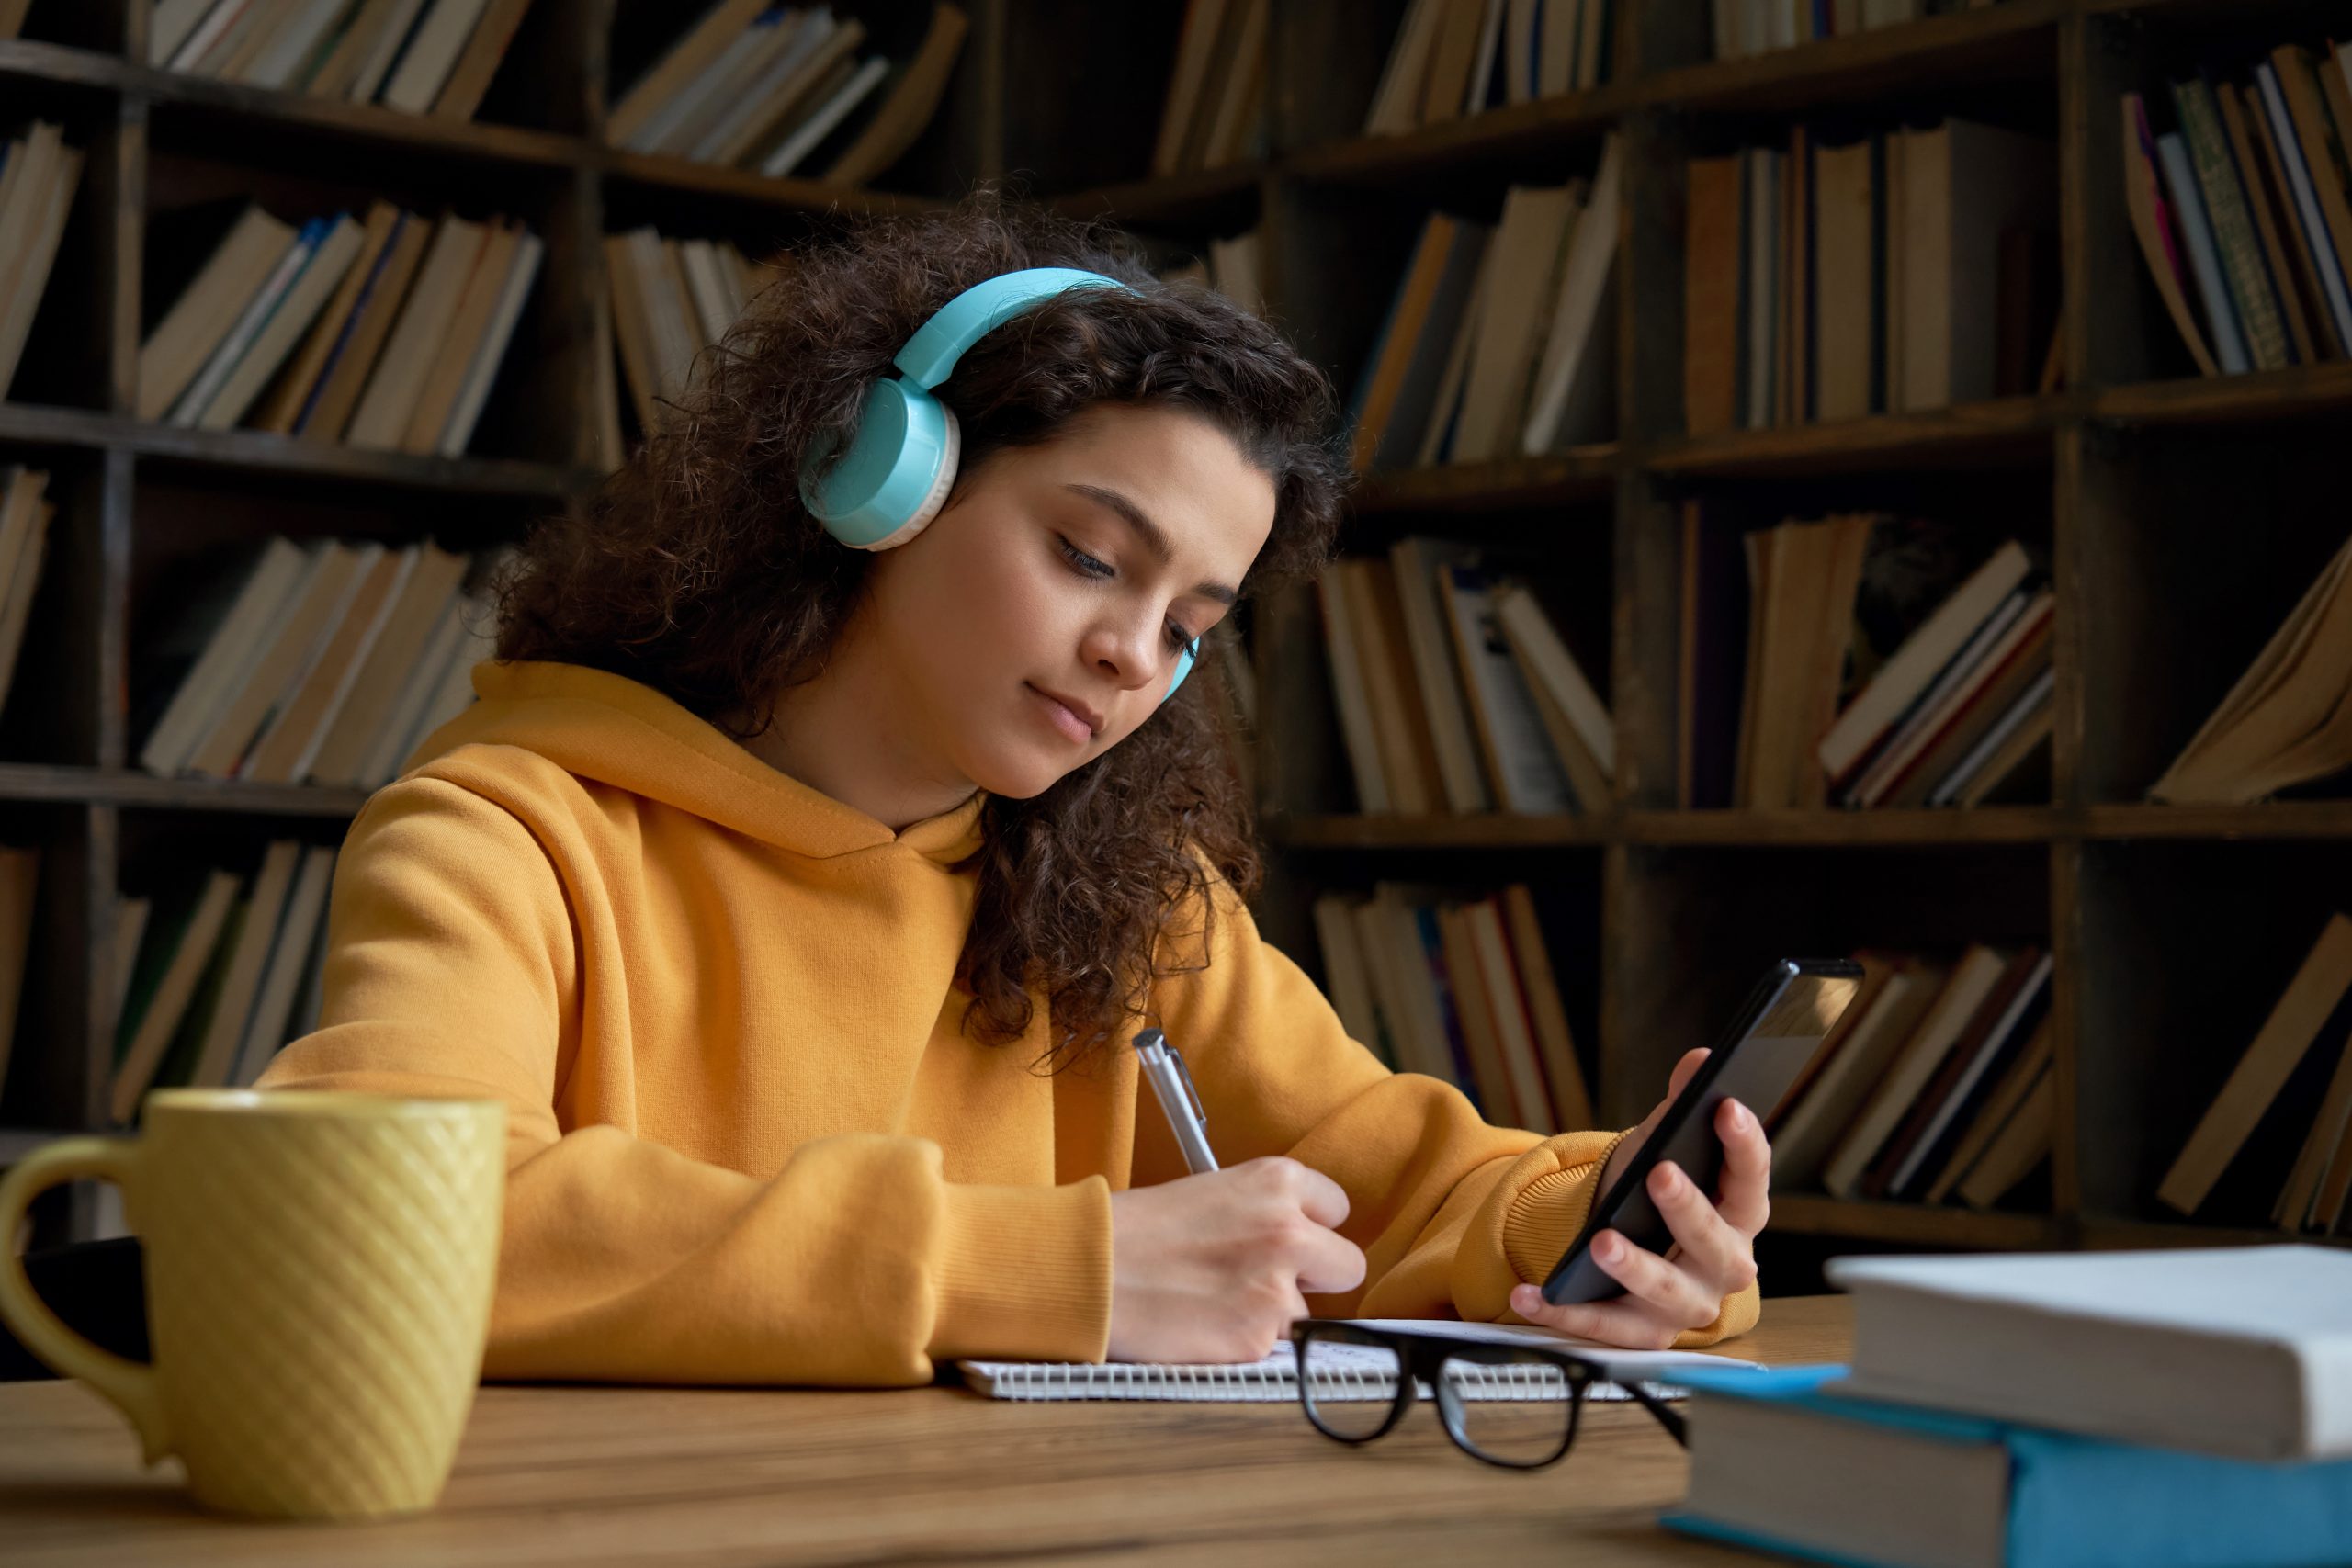 Student wearing headset and holding a smart phone while writing in a notebook in a library, with a mug and glasses in the background.